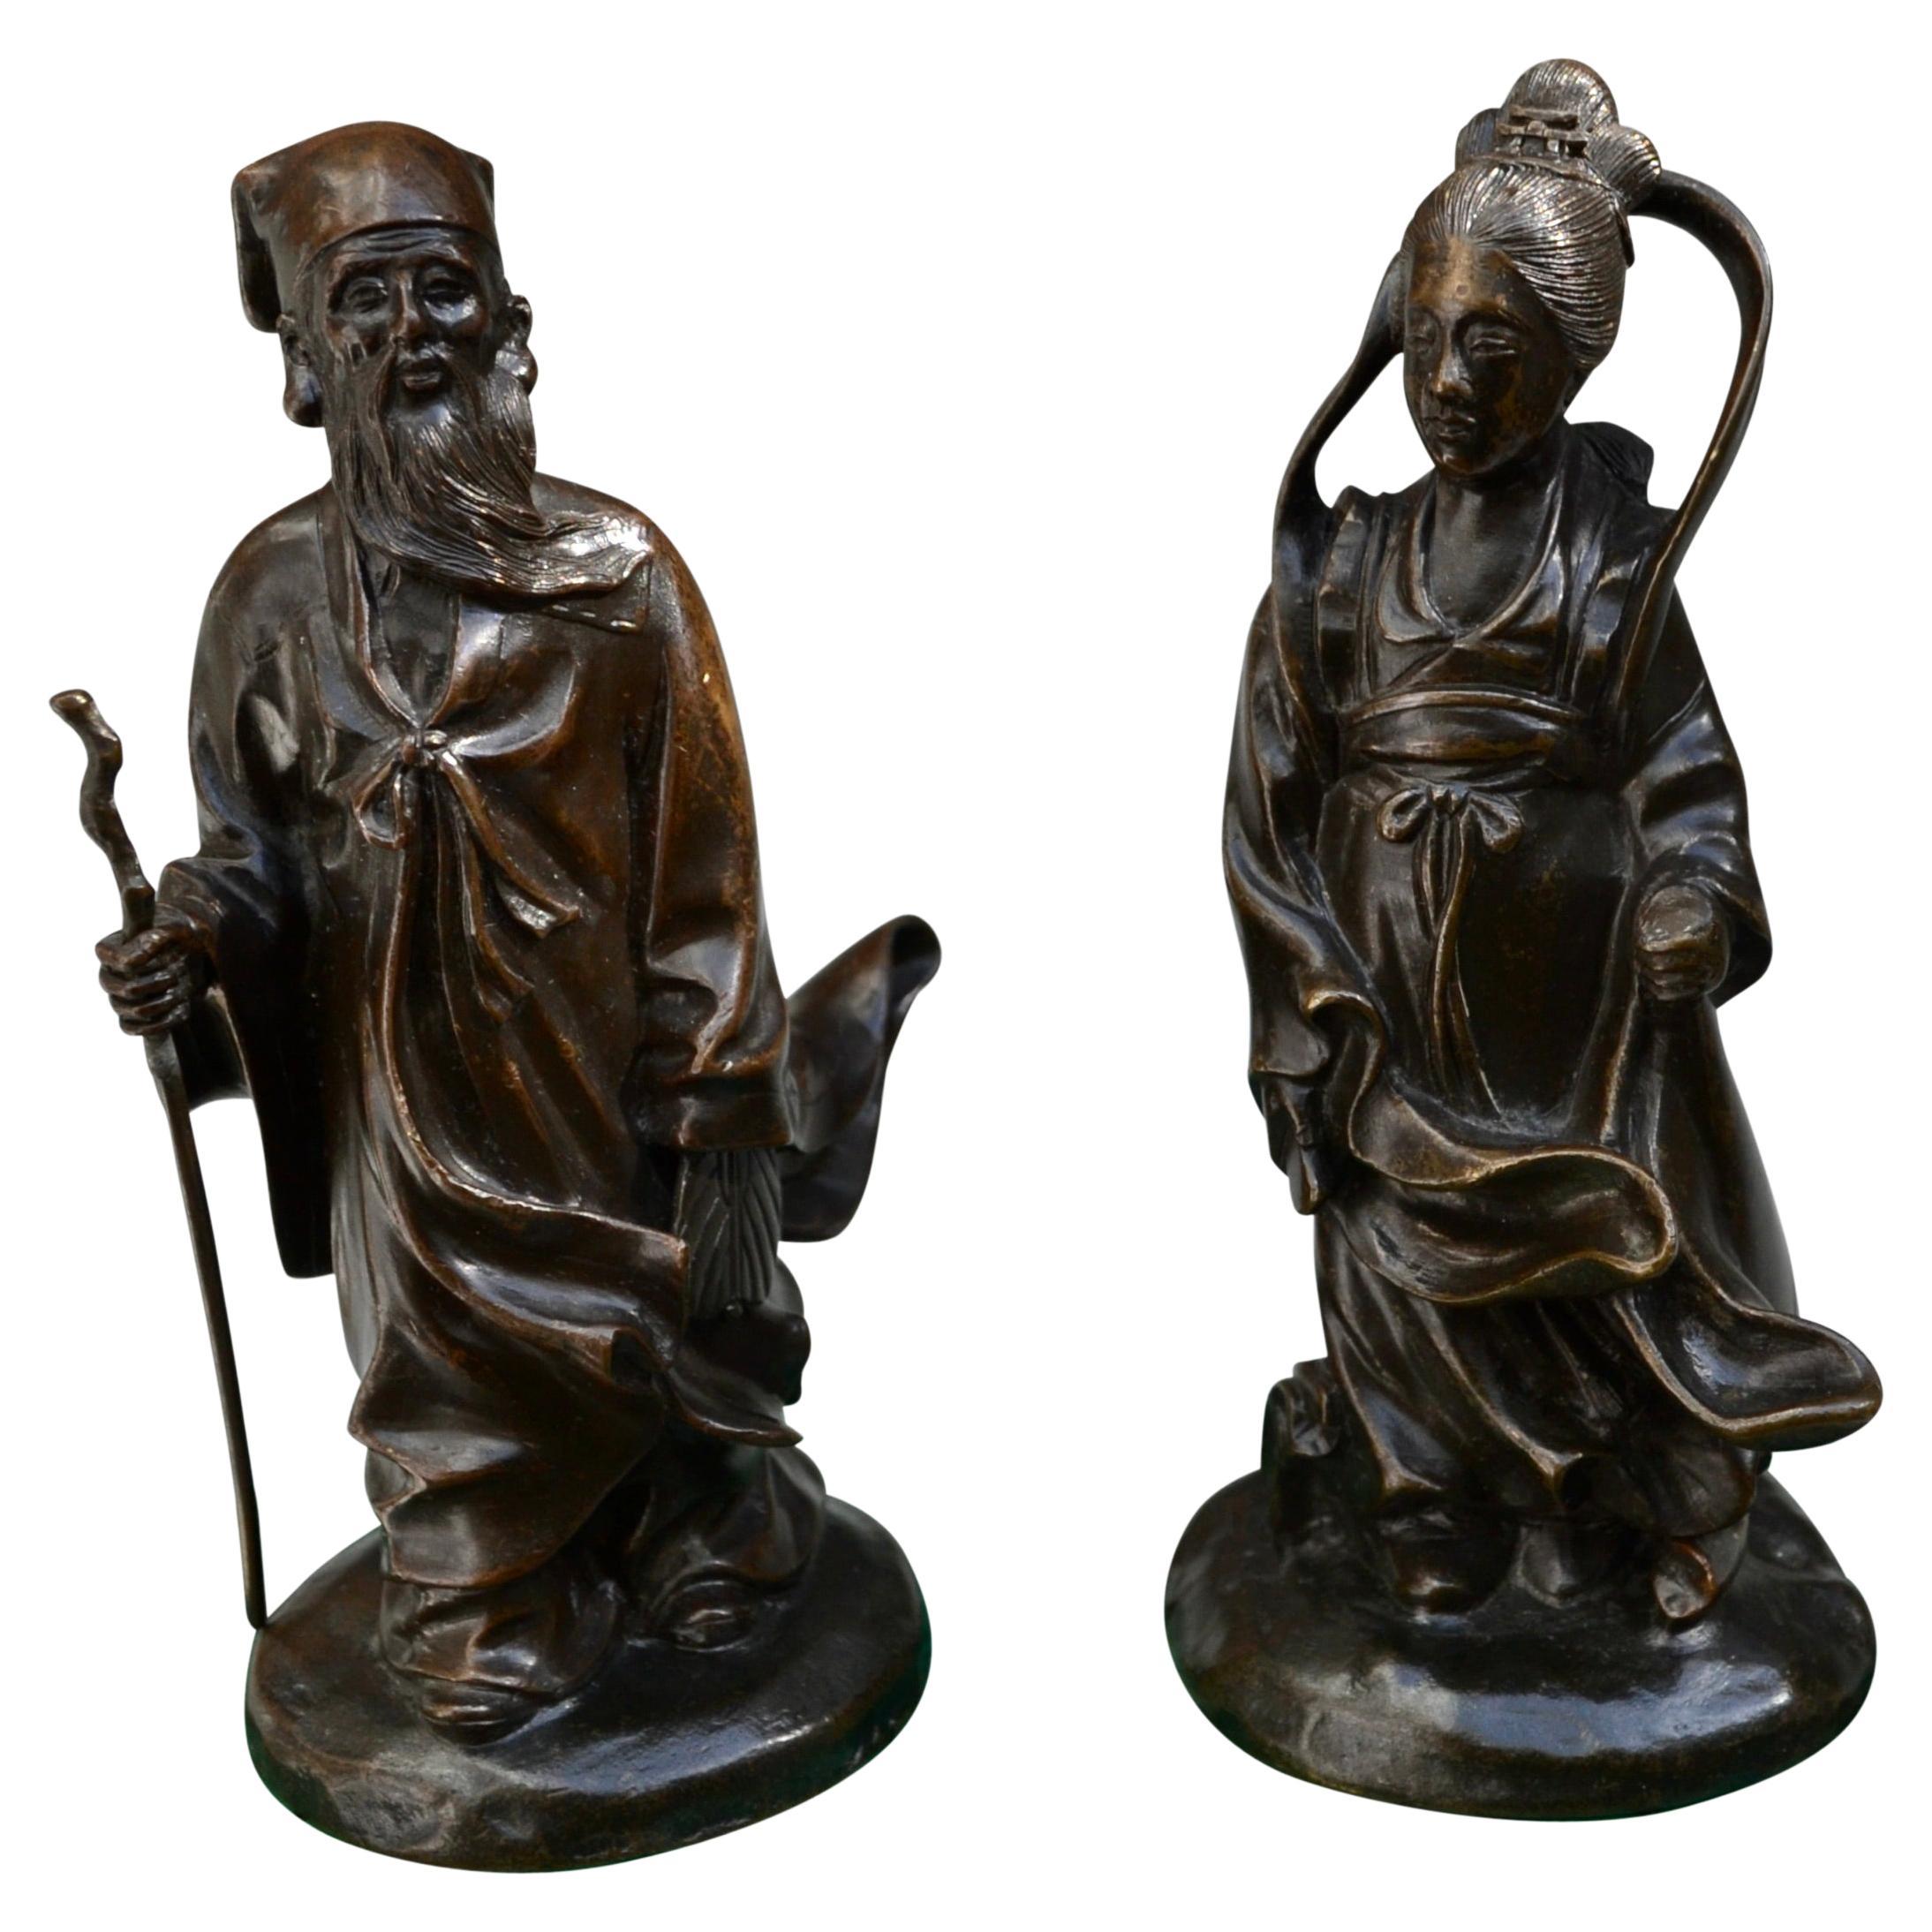 A Pair of Small 19 Century Chinese Patinated Bronze Statues of Gods or Deities  